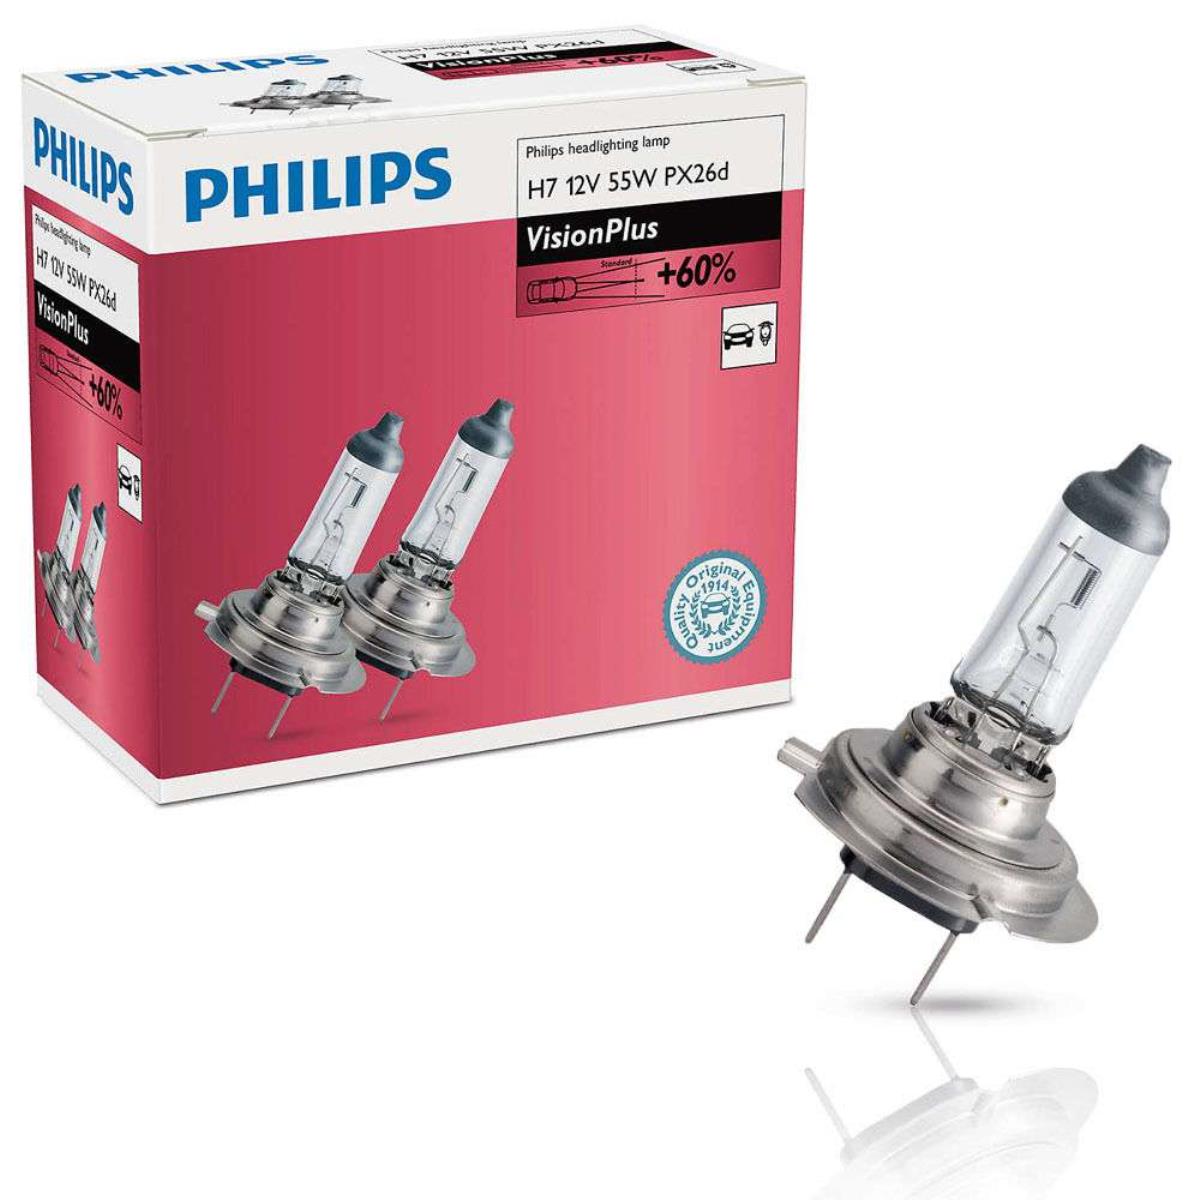 PHILIPS 12972VPC2 Glühlampe Beleuchtung